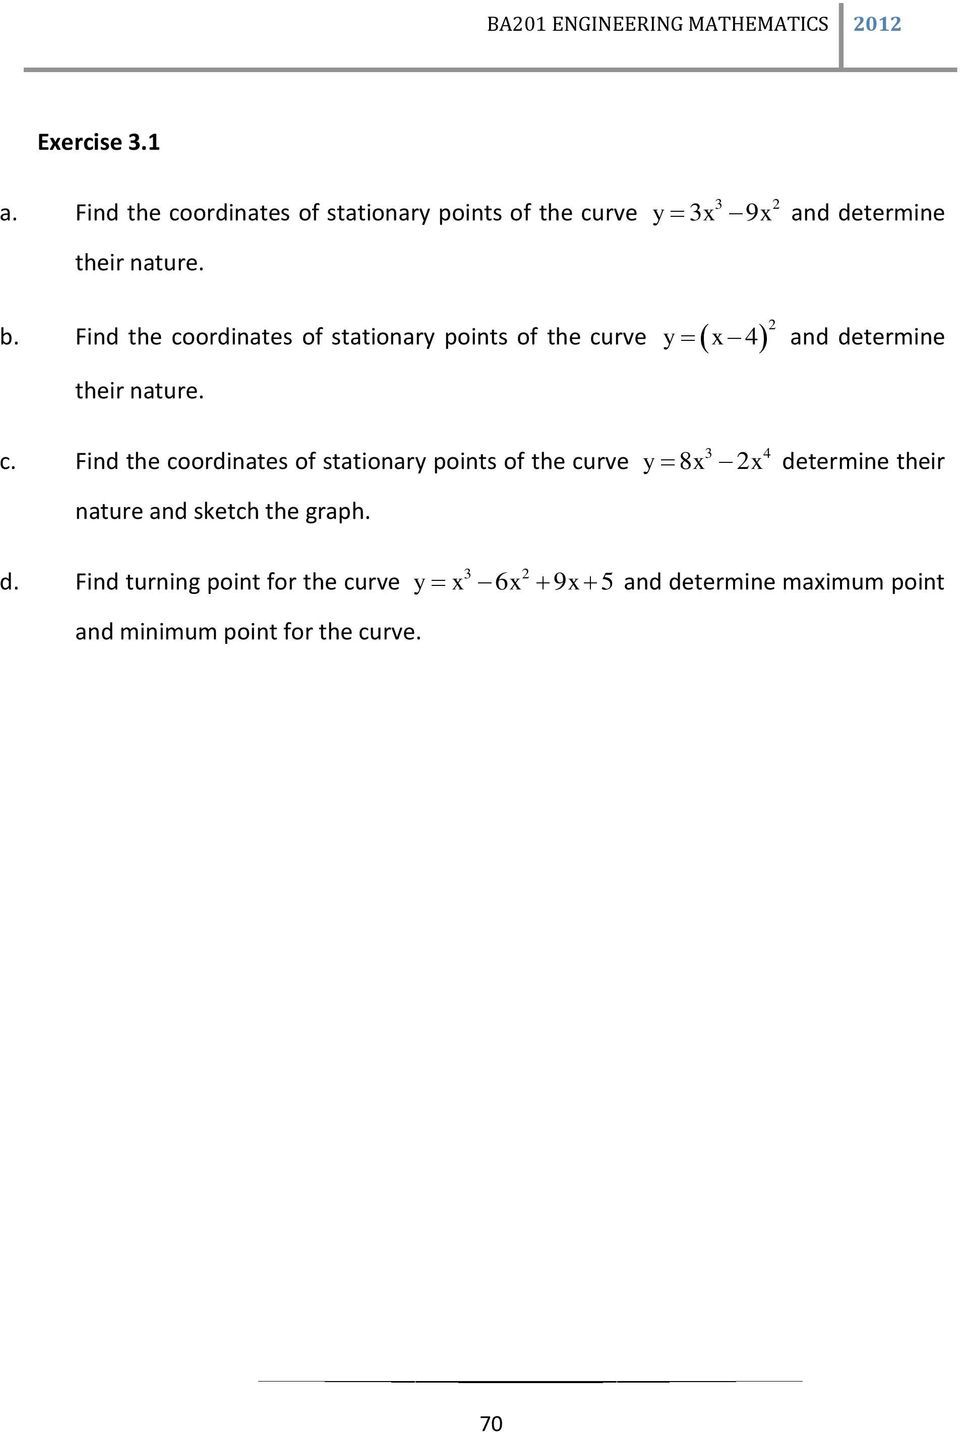 Find the coordinates of stationary points of the curve their nature. y x 4 and determine c.